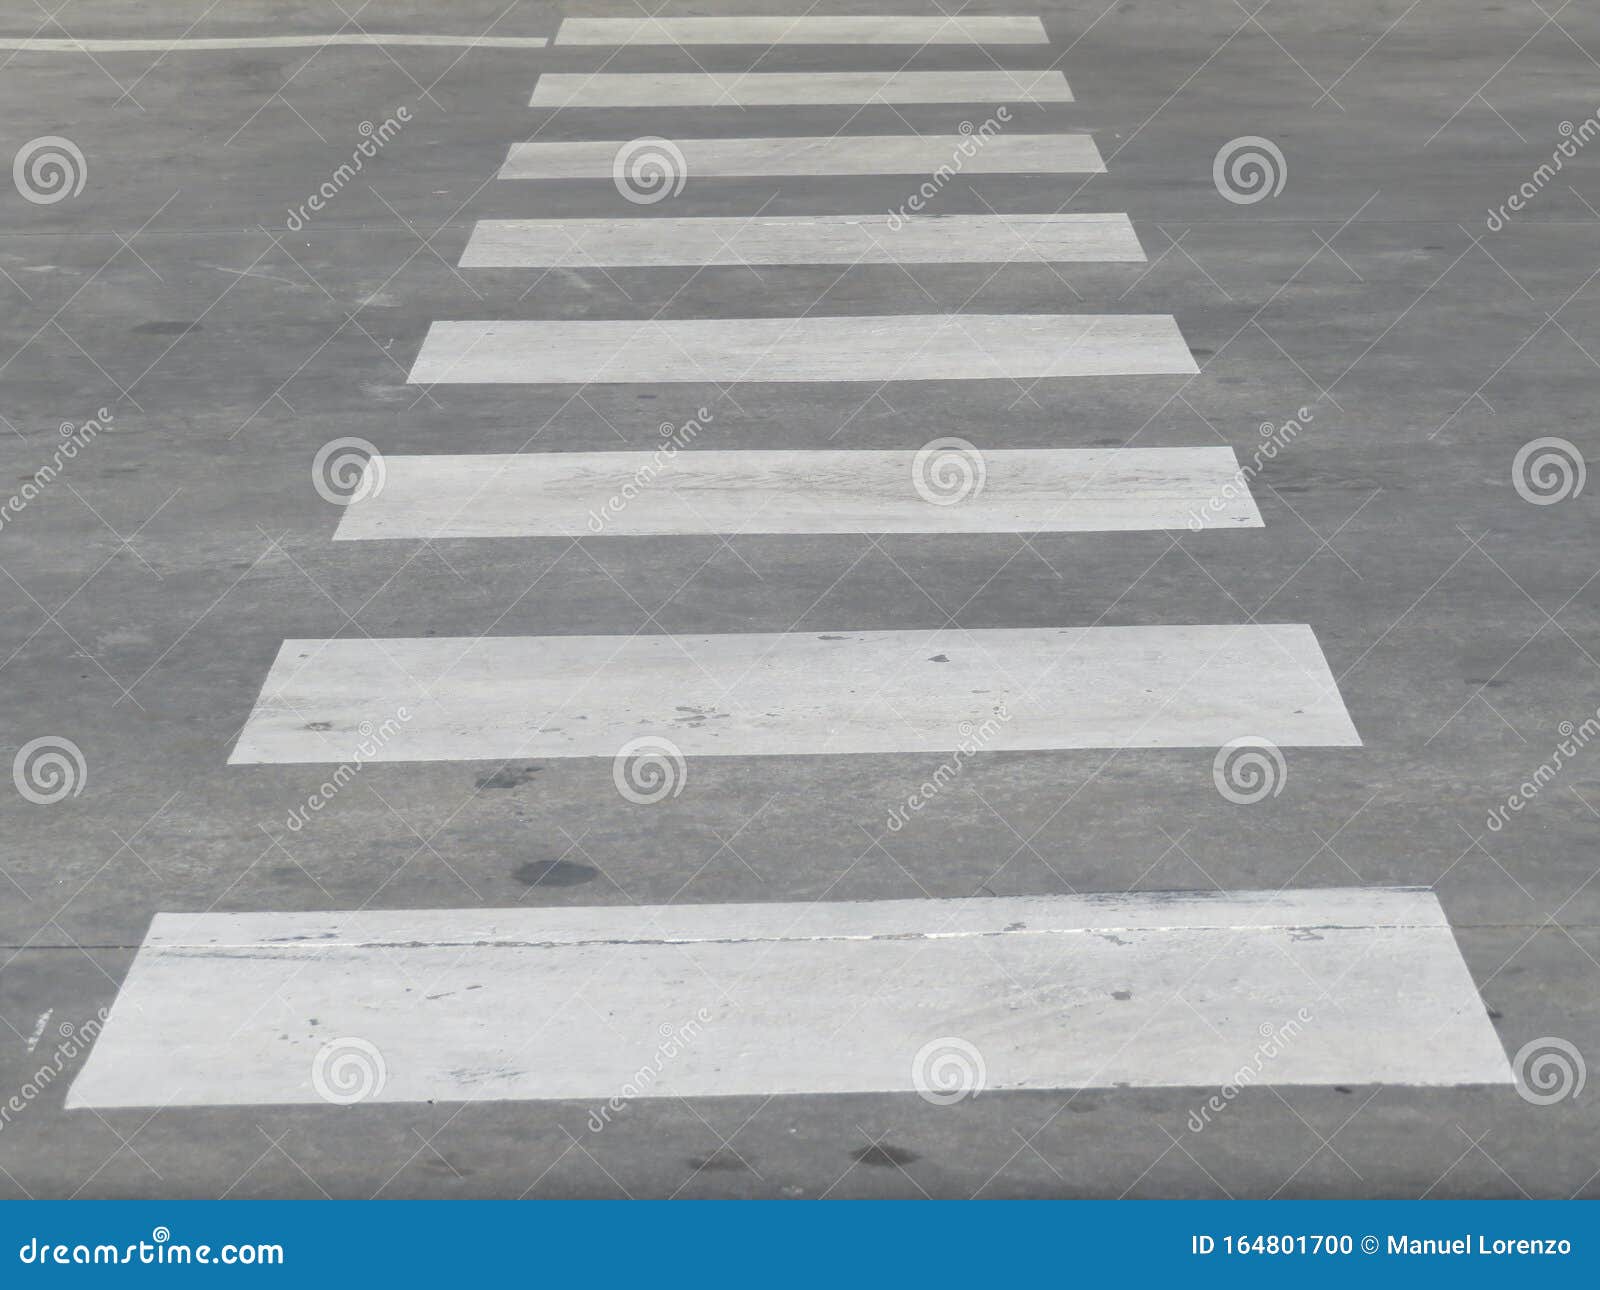 beautiful zebra crossing for the safety of persons